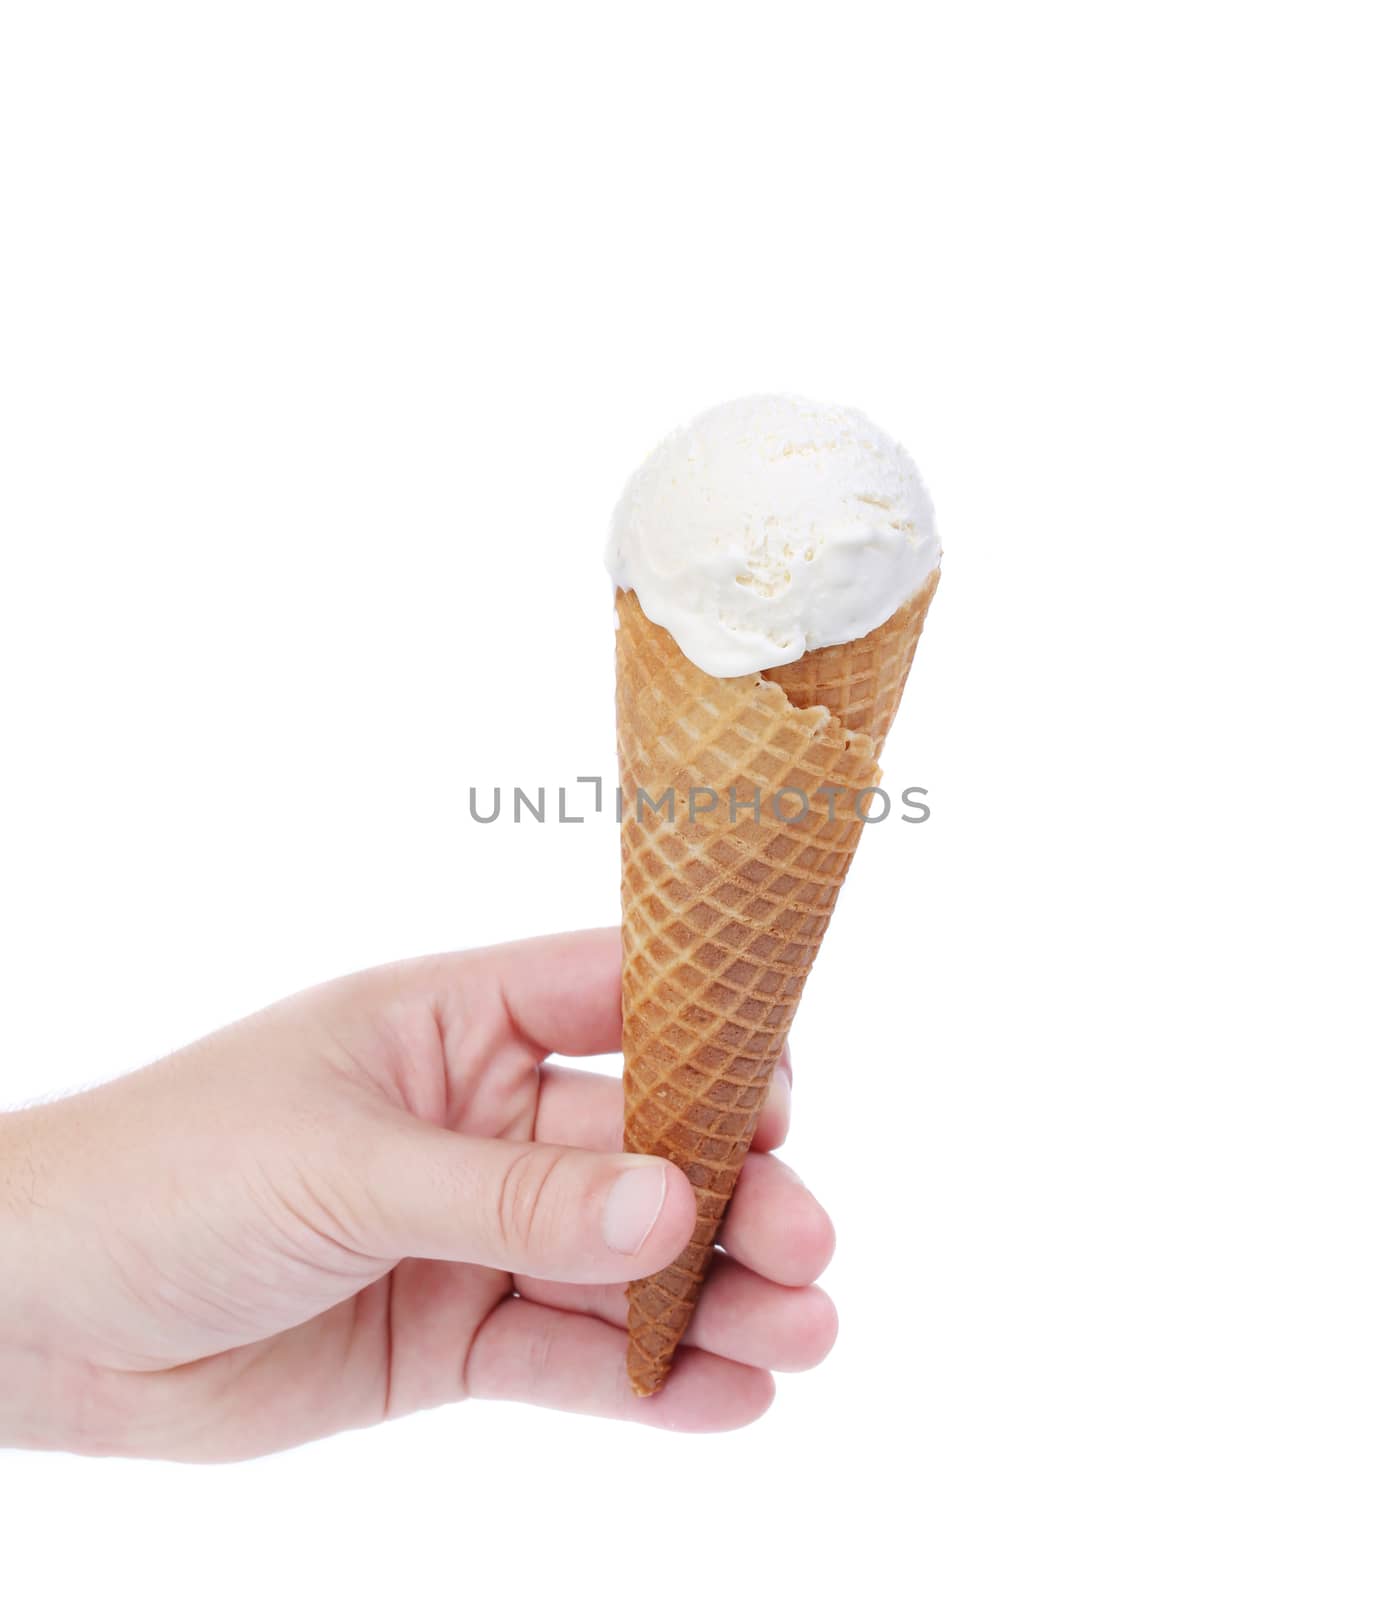 Hand holds cone vanille ice cream. by indigolotos